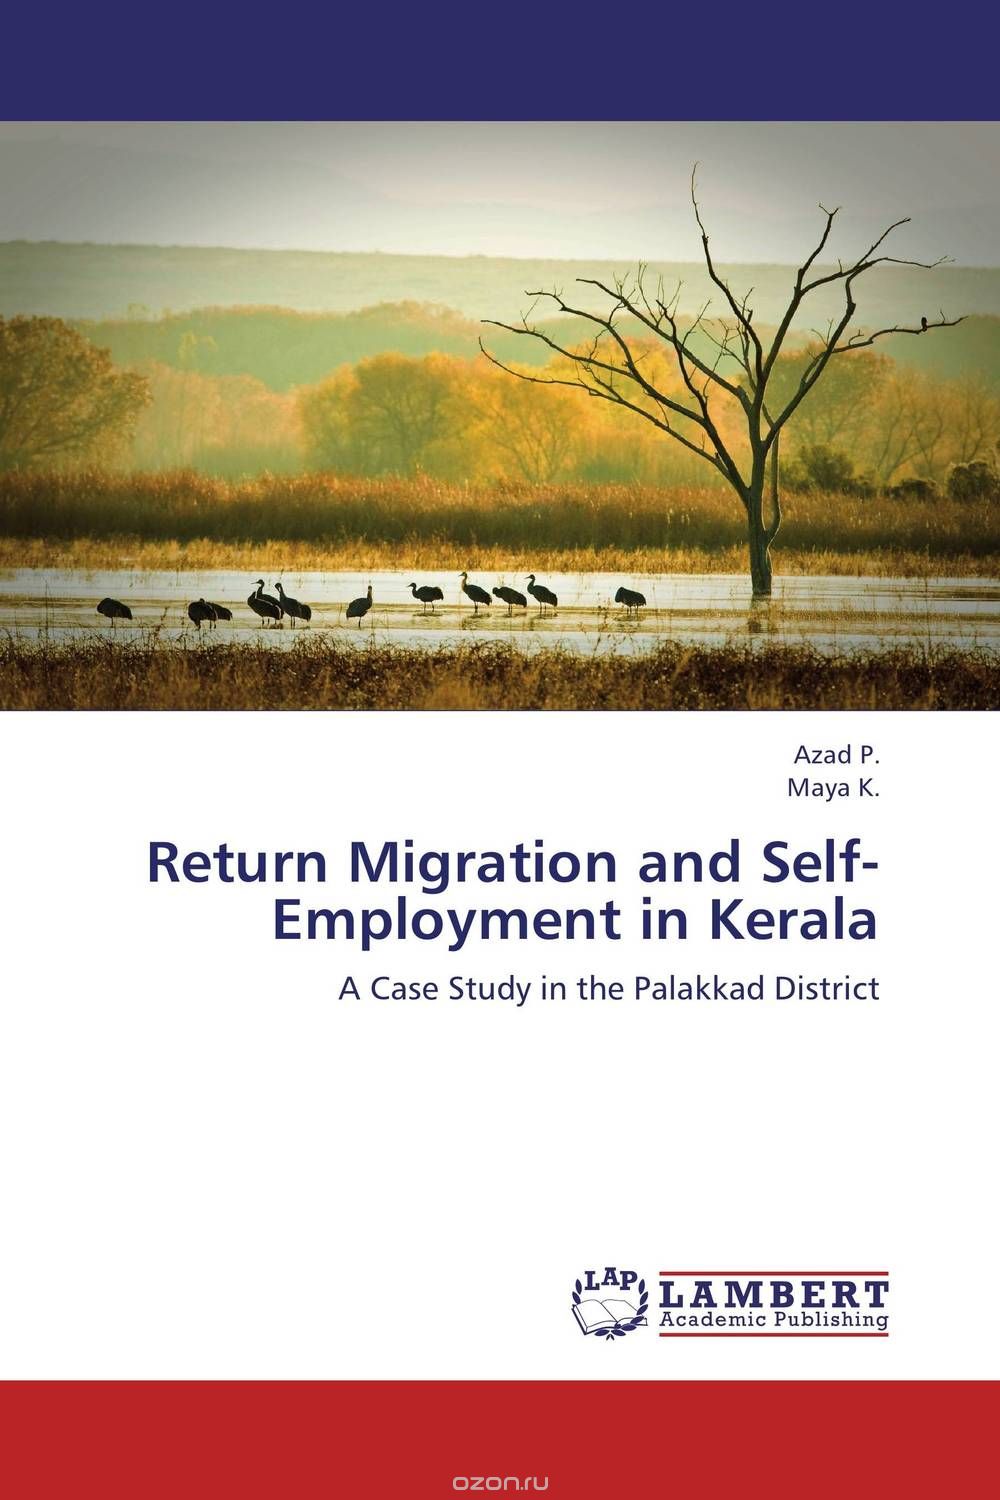 Return Migration and Self-Employment in Kerala